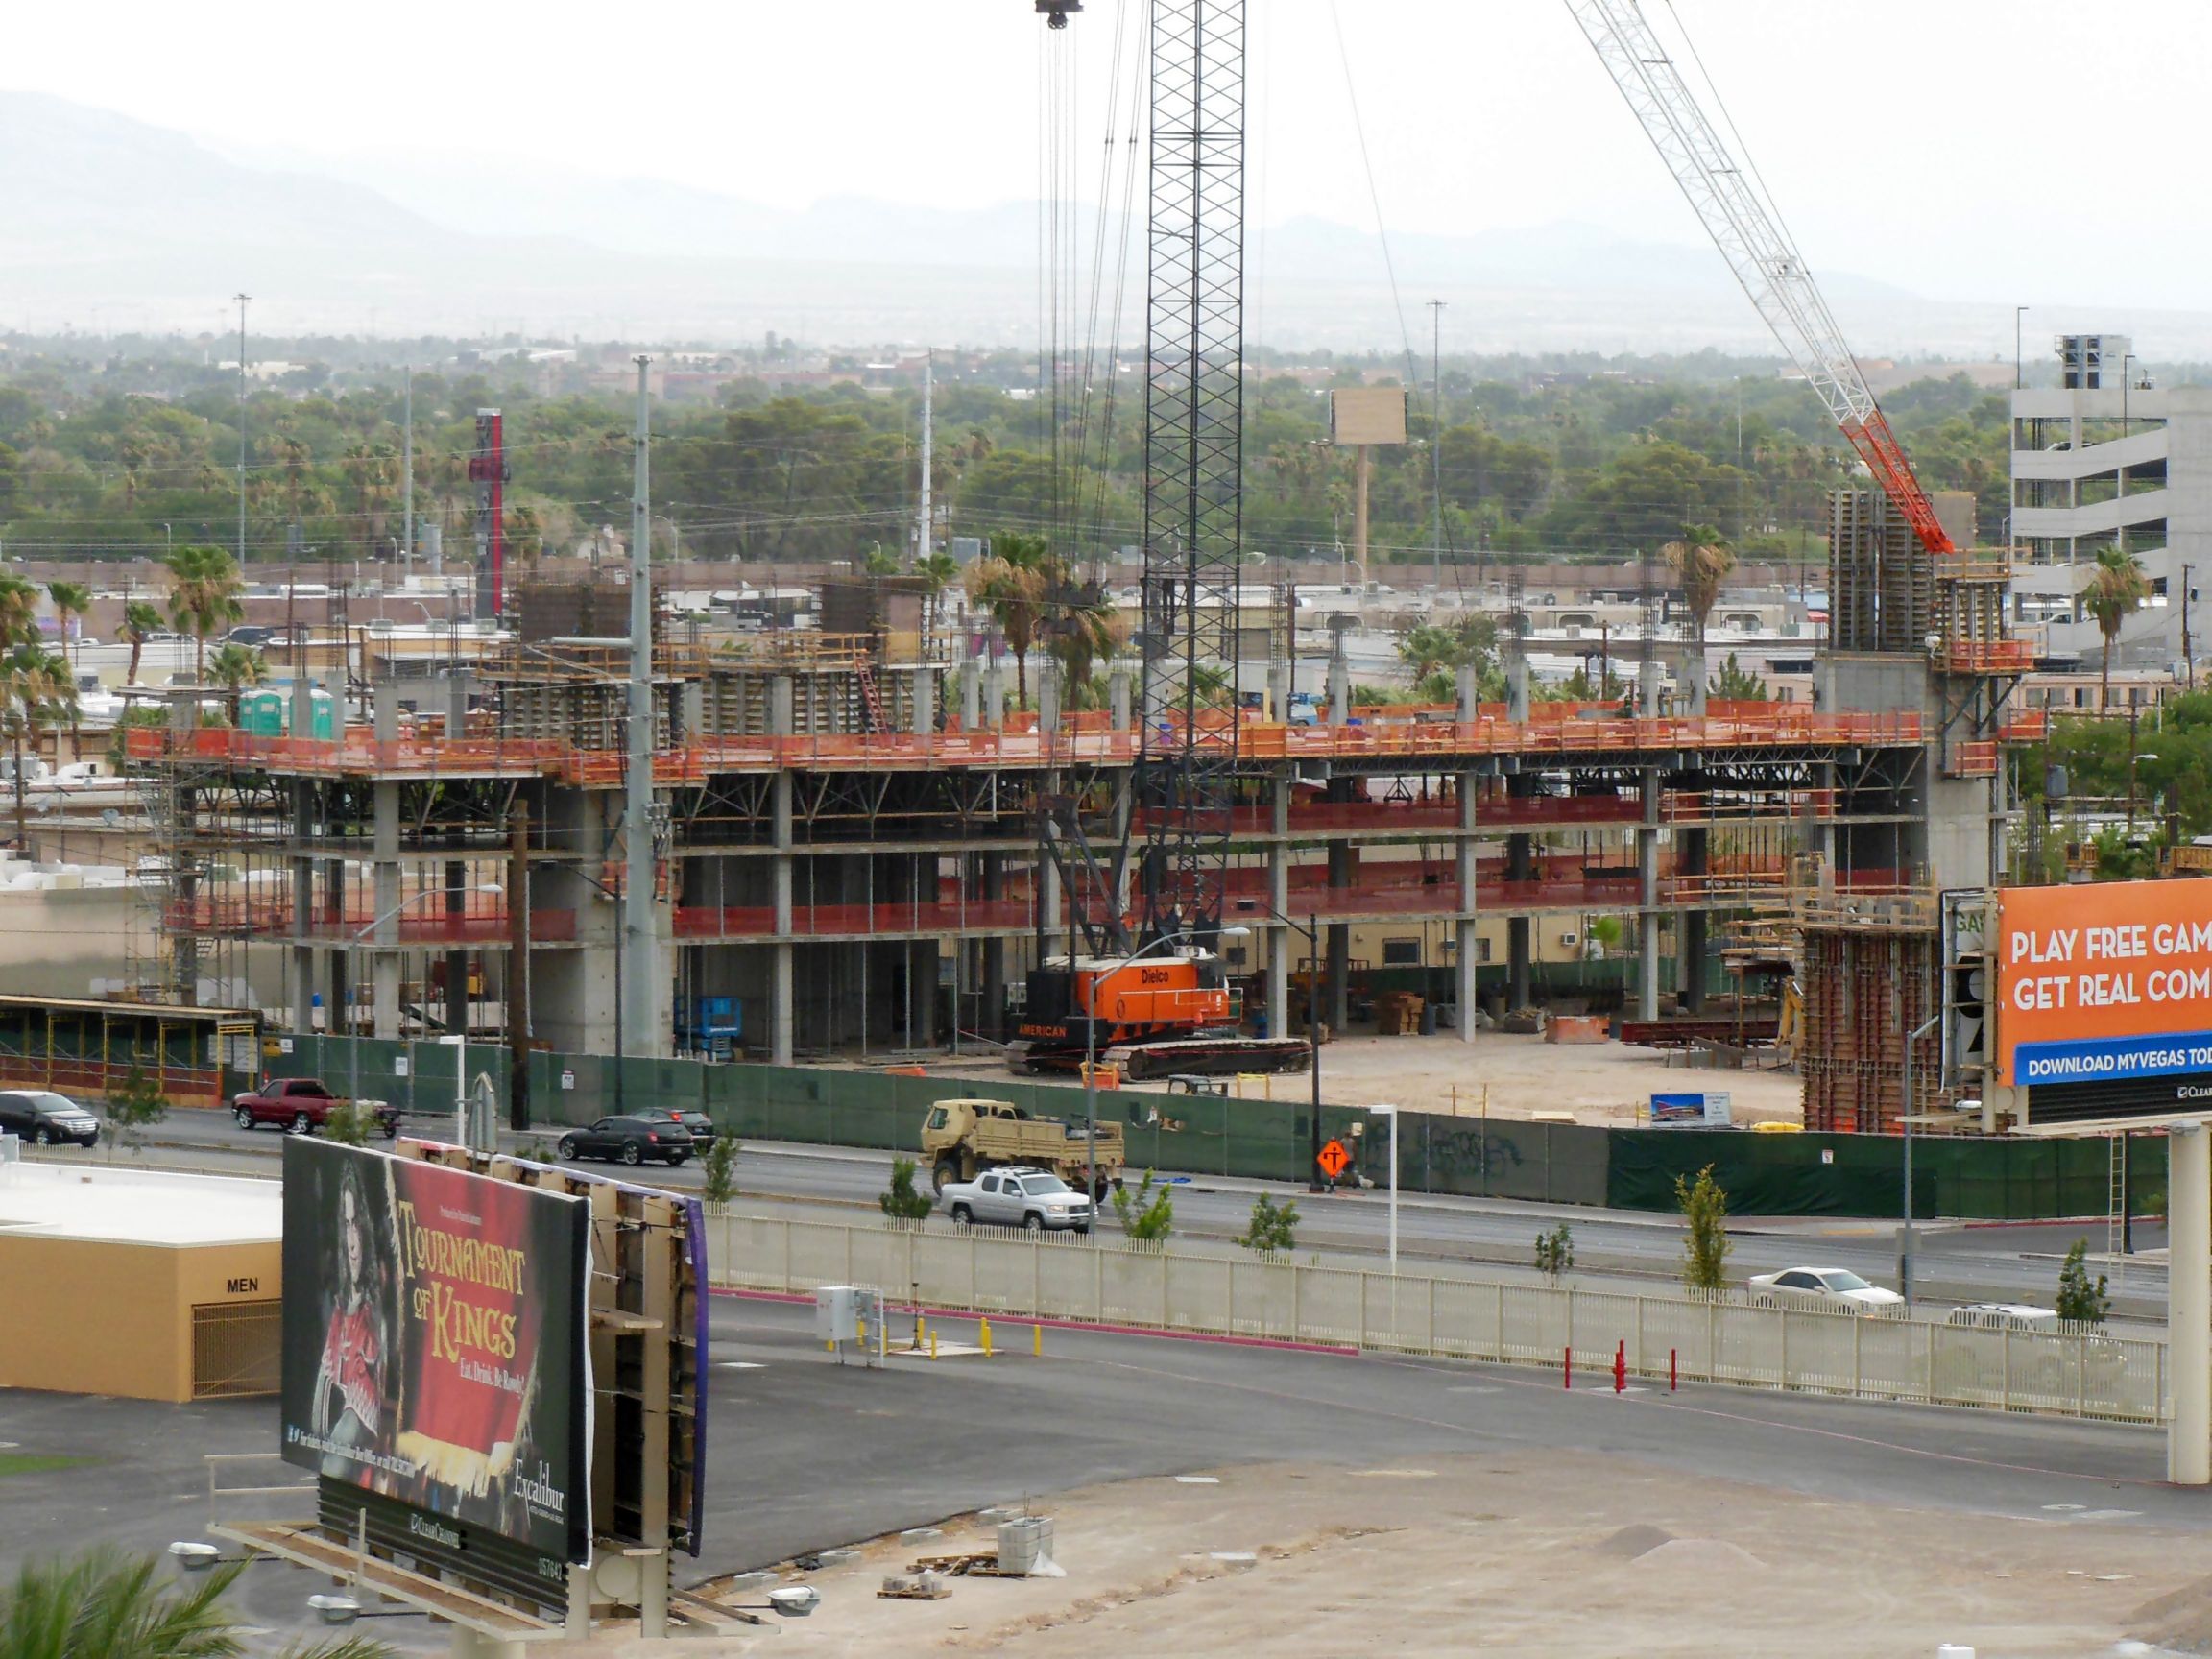 The Lucky Dragon Hotel and Casino Construction. June 6th, 2015